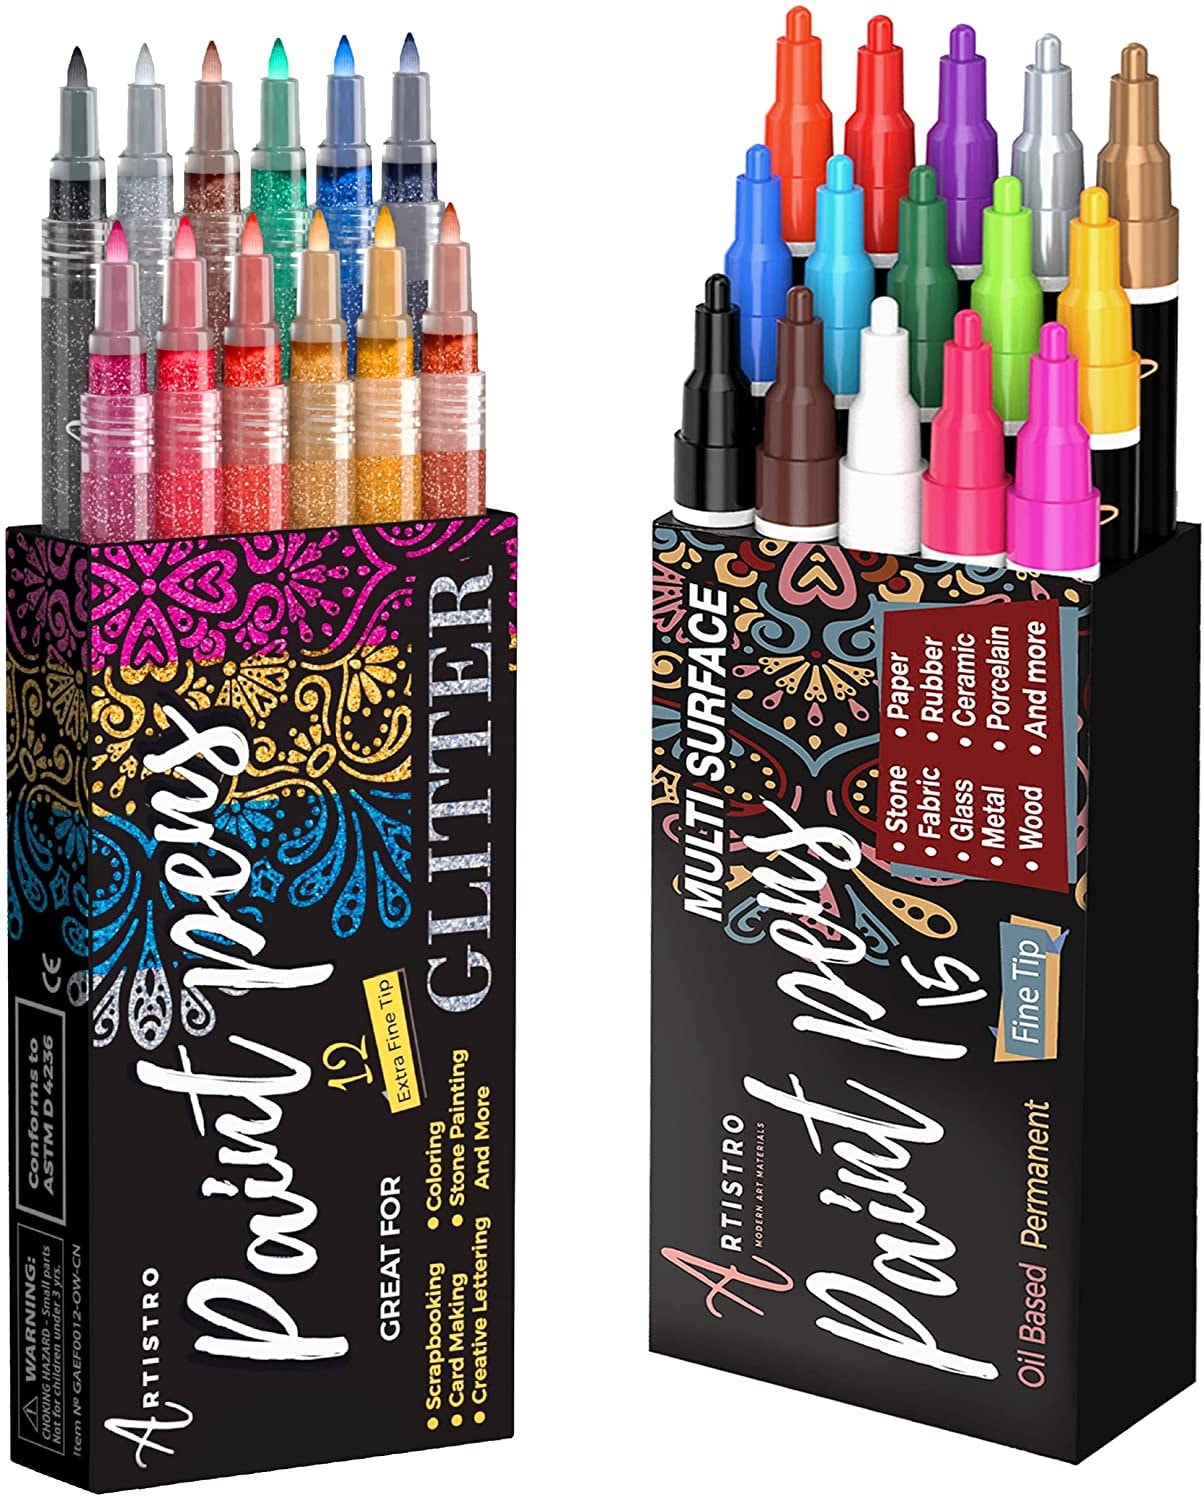 SHARPIE Oil-Based Paint Markers, Medium Point, Assorted Colors, 8 Count -  Great for Rock Painting